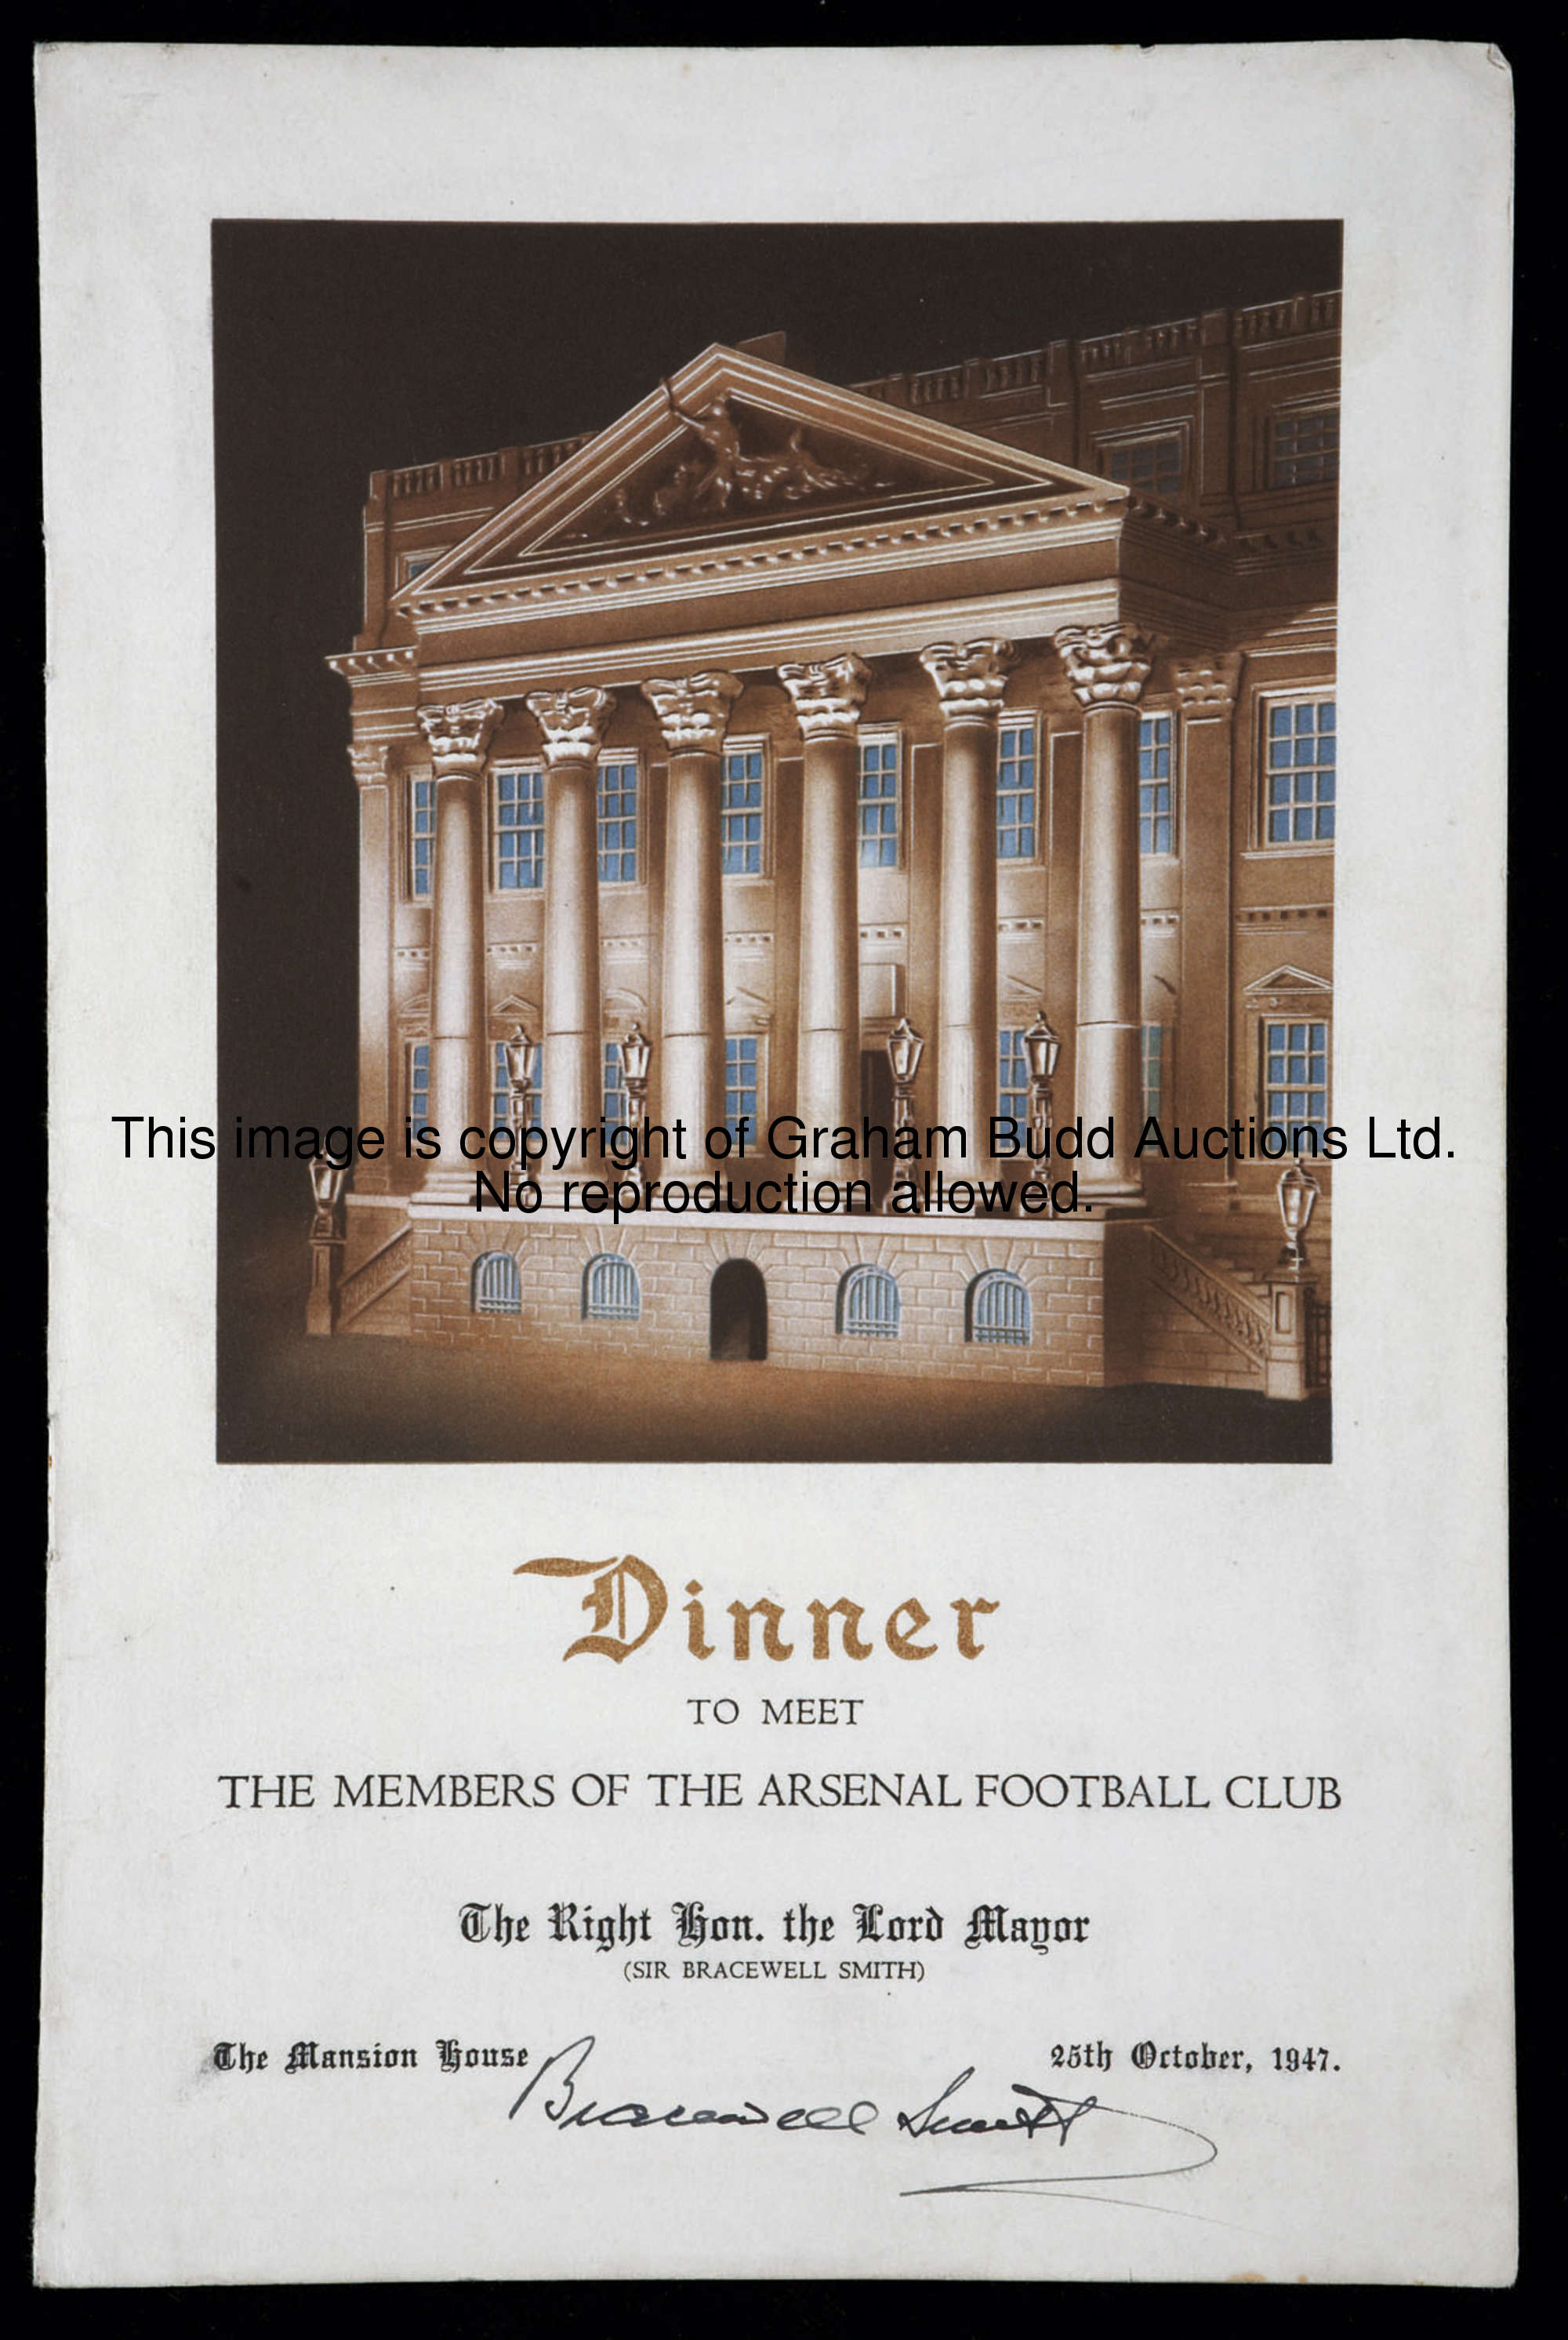 An autographed menu for a Lord Mayor of London dinner to meet the Arsenal Football Club at The Mansi...